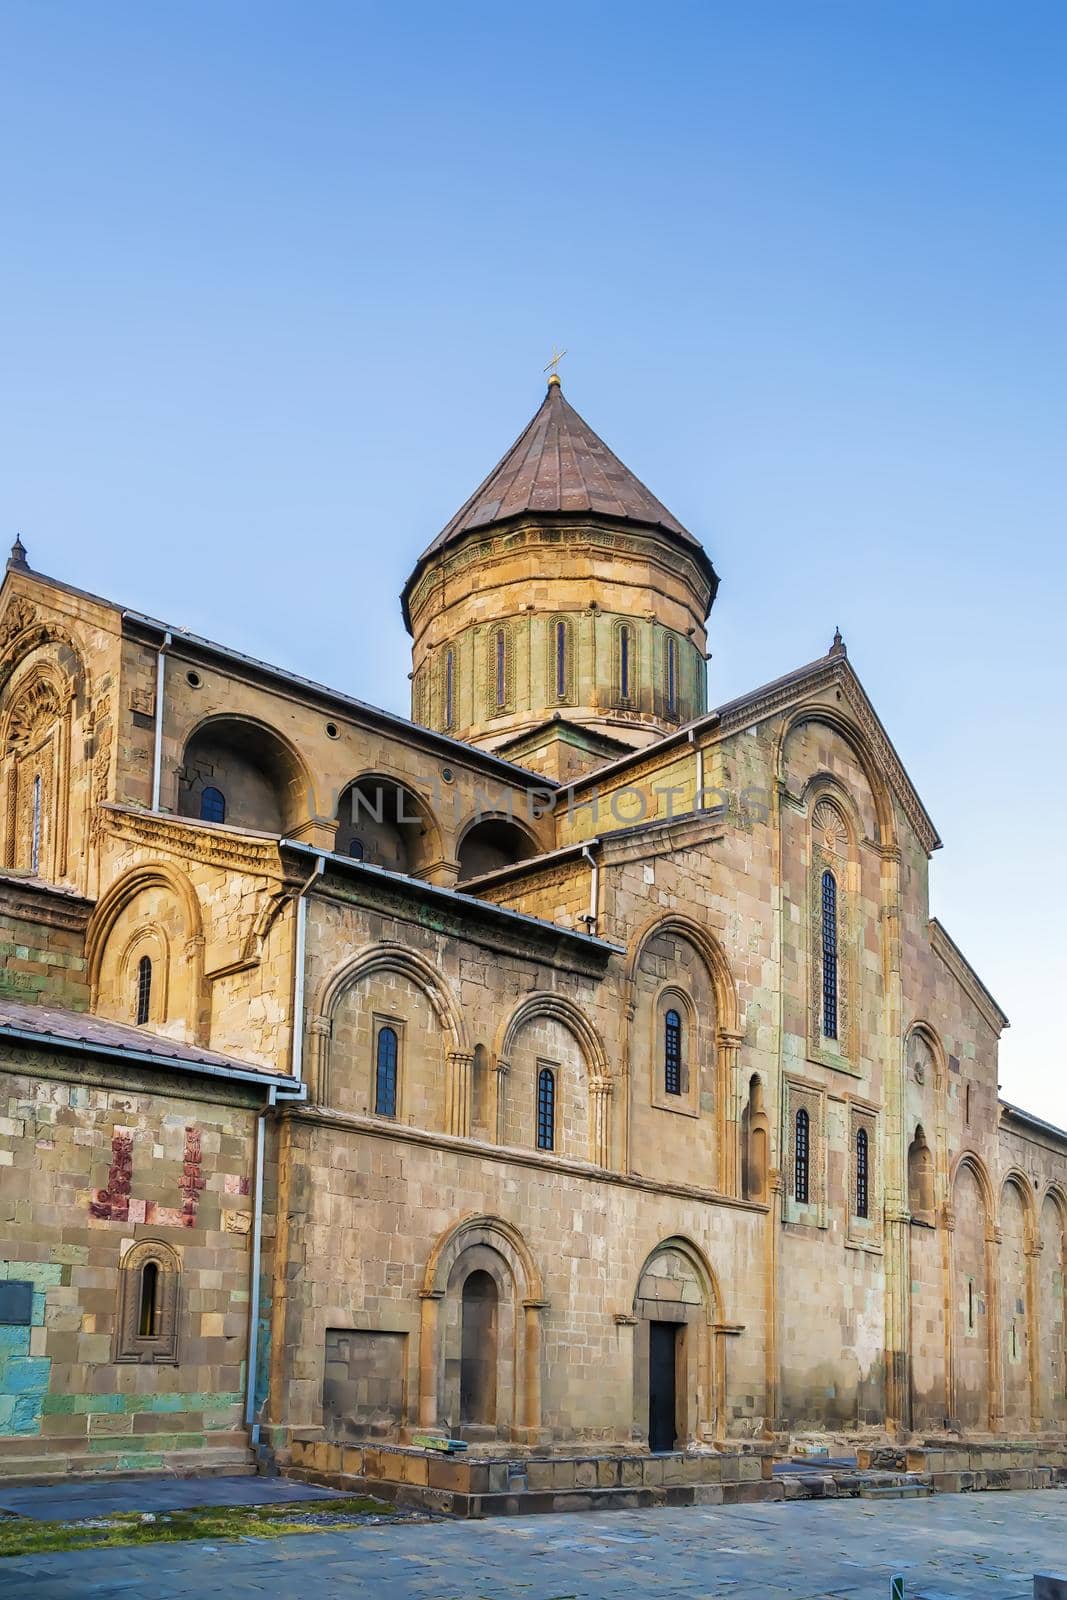 Svetitskhoveli Cathedral is an Eastern Orthodox cathedral located in the historic town of Mtskheta, Georgia